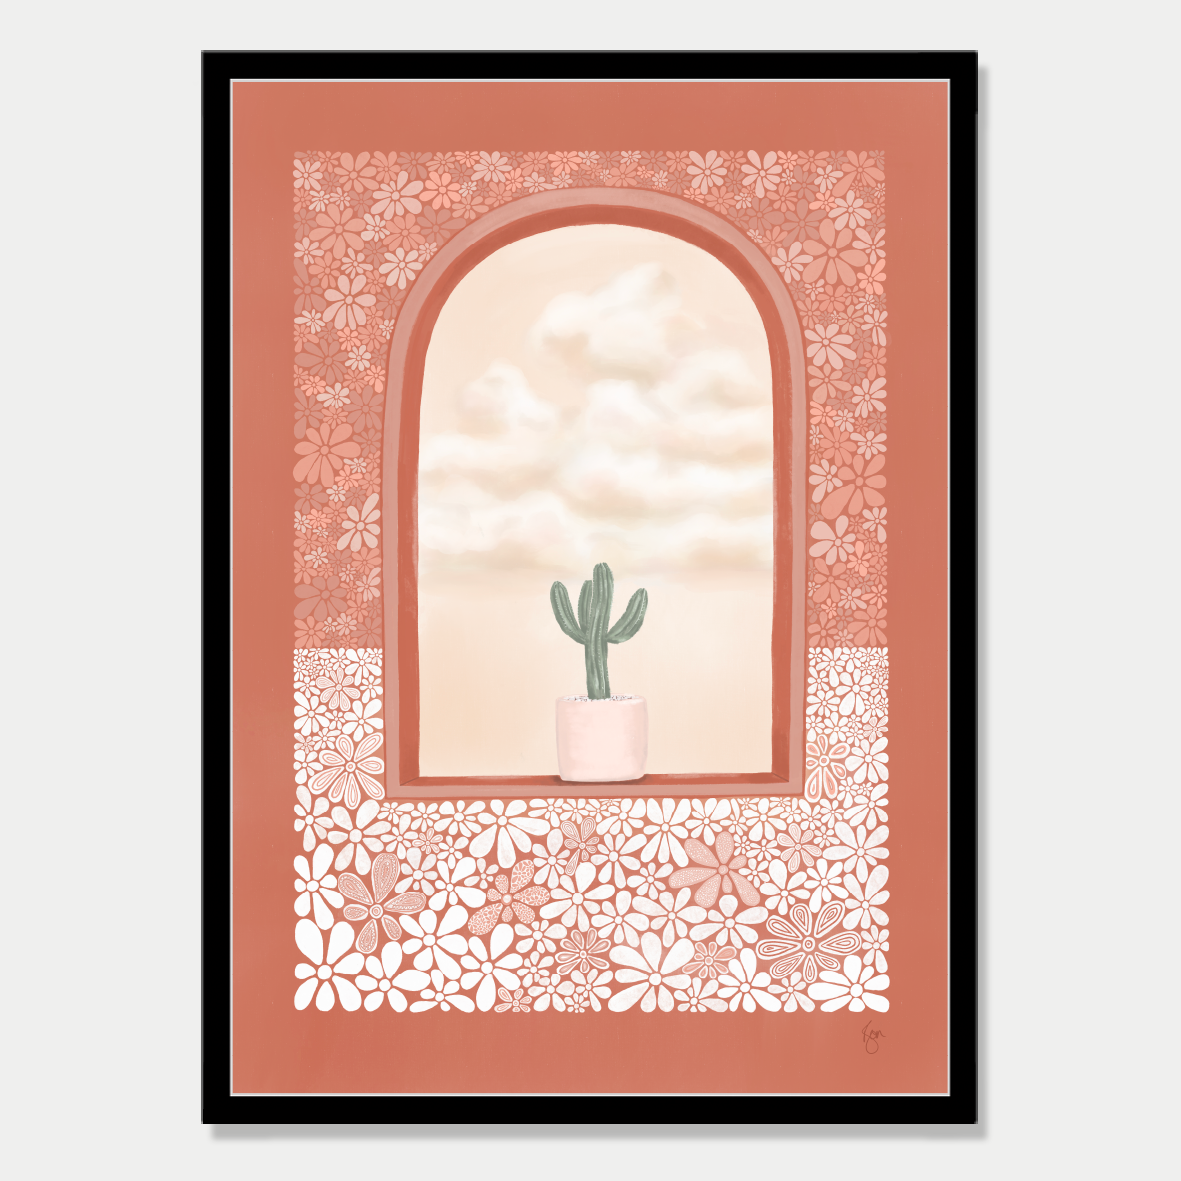 Art print of an arched window with a plant sitting in it and a view of fluffy clouds, in a terracotta colour palette, by Bon Jung. Printed in New Zealand by endemicworld and framed in black.